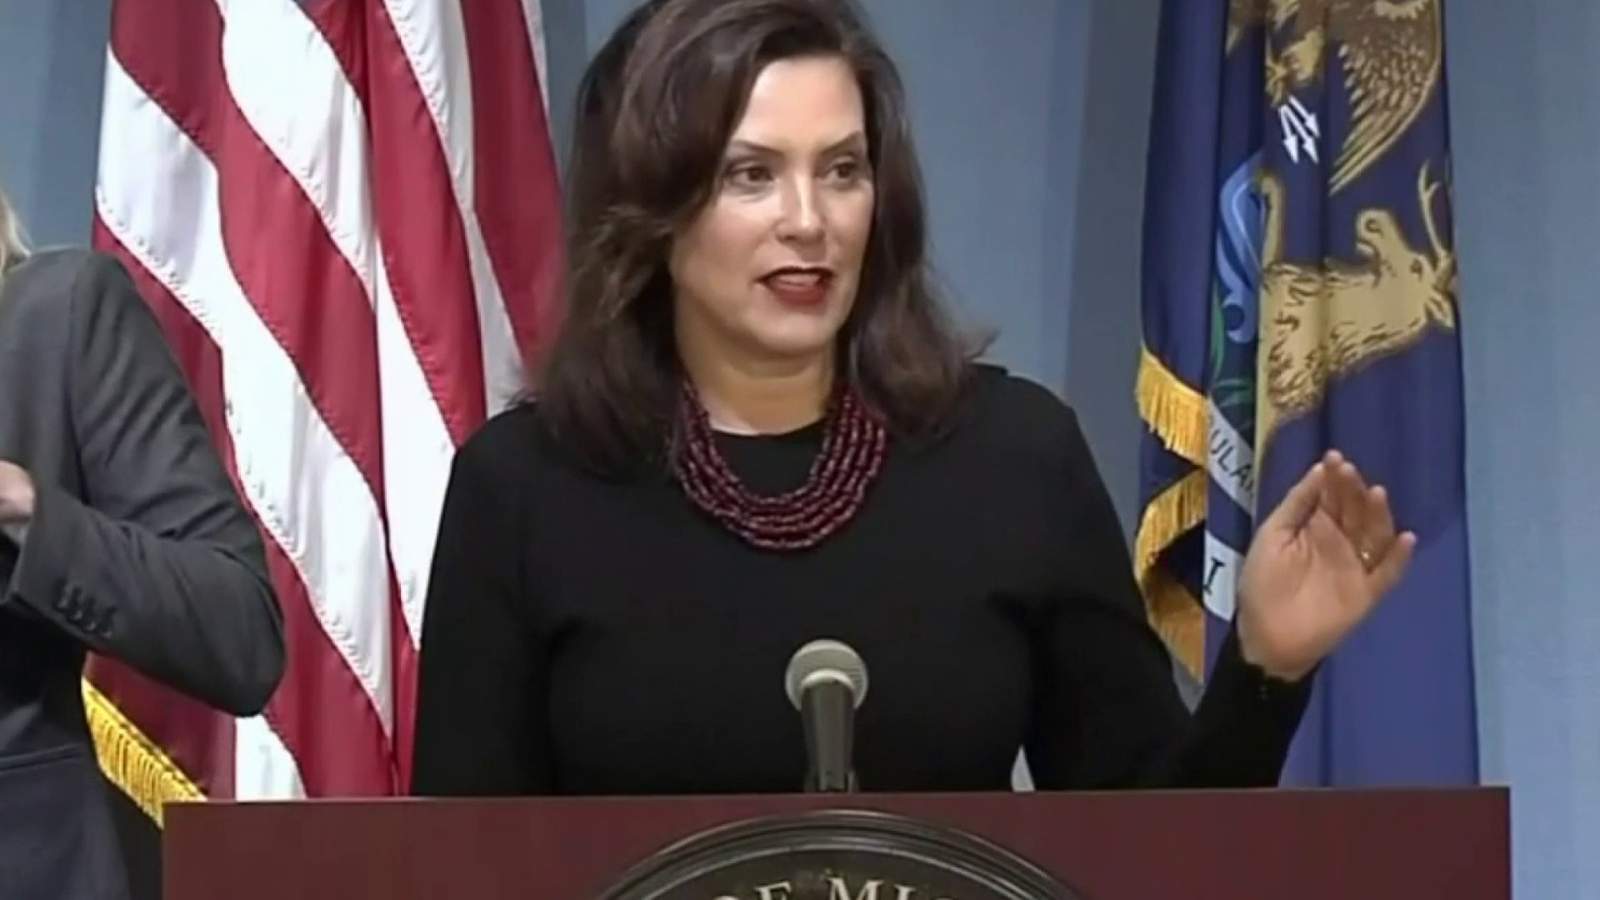 Michigan Gov. Whitmer called to testify before US House subcommittee about COVID-19 response